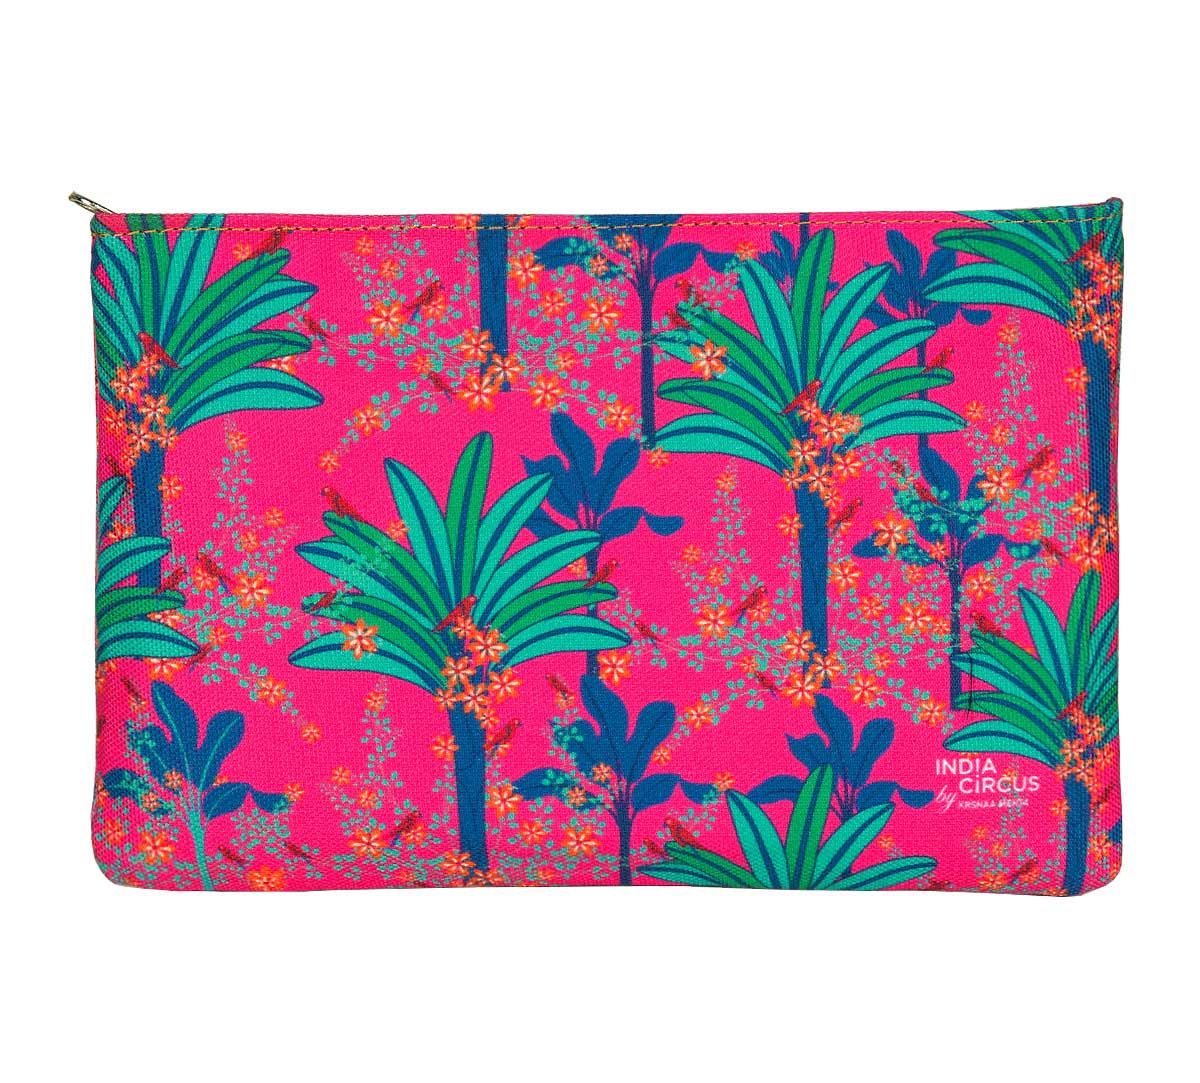 India Circus Royal Palms Utility Pouch